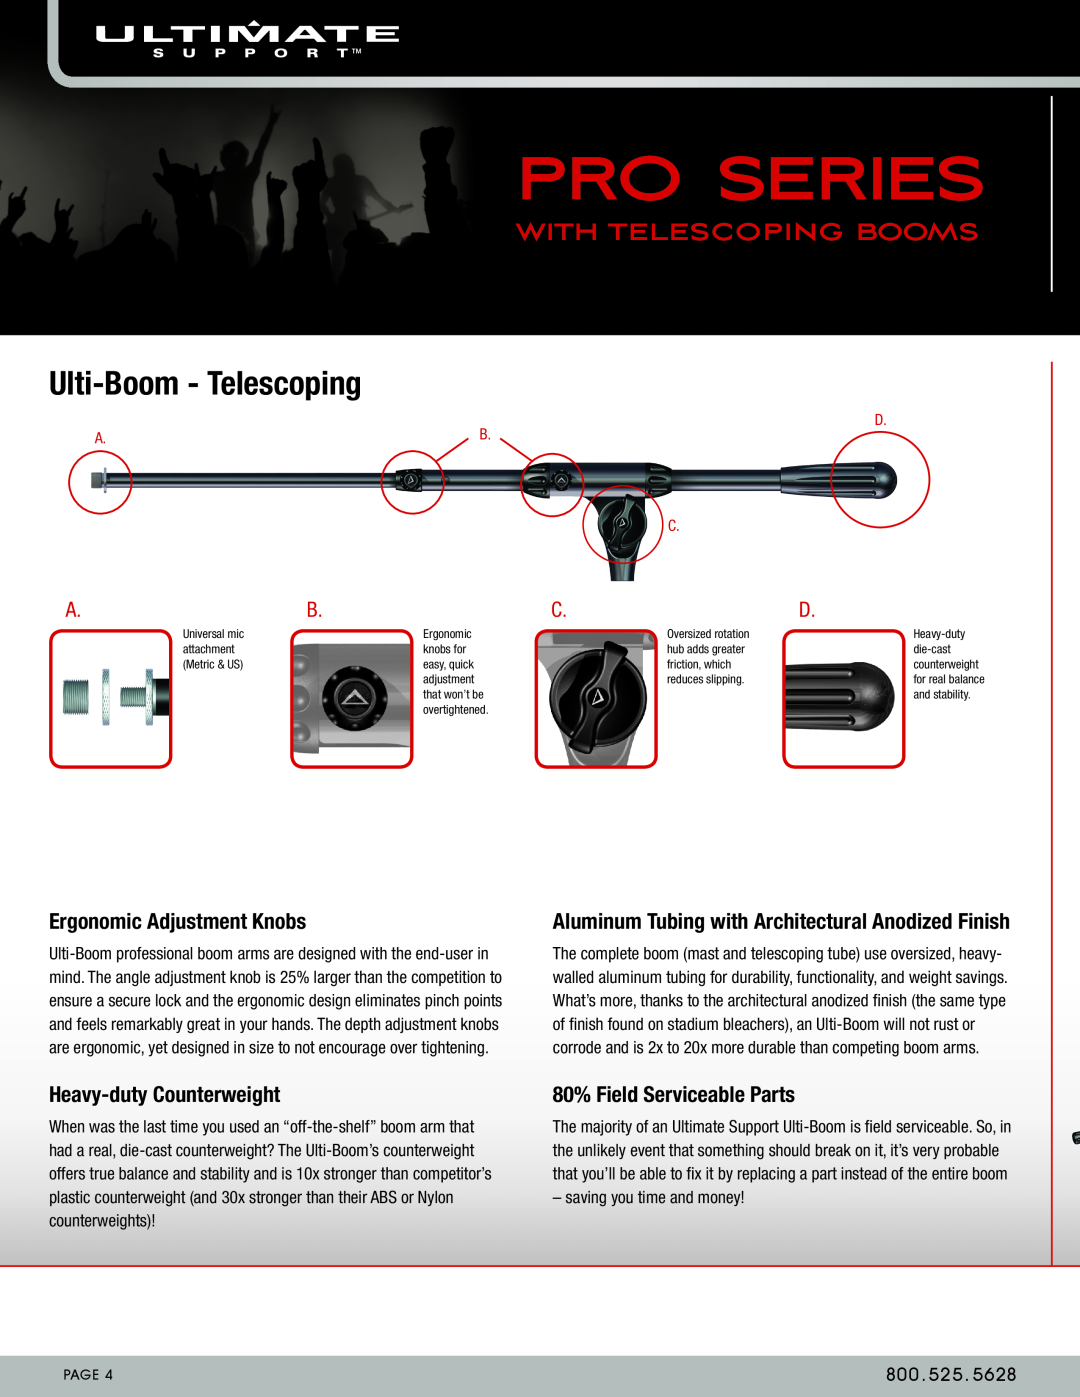 Ultimate Support Systems PRO-ST-T Ulti-Boom - Telescoping, Ergonomic Adjustment Knobs, Heavy-duty Counterweight, 800 .525 